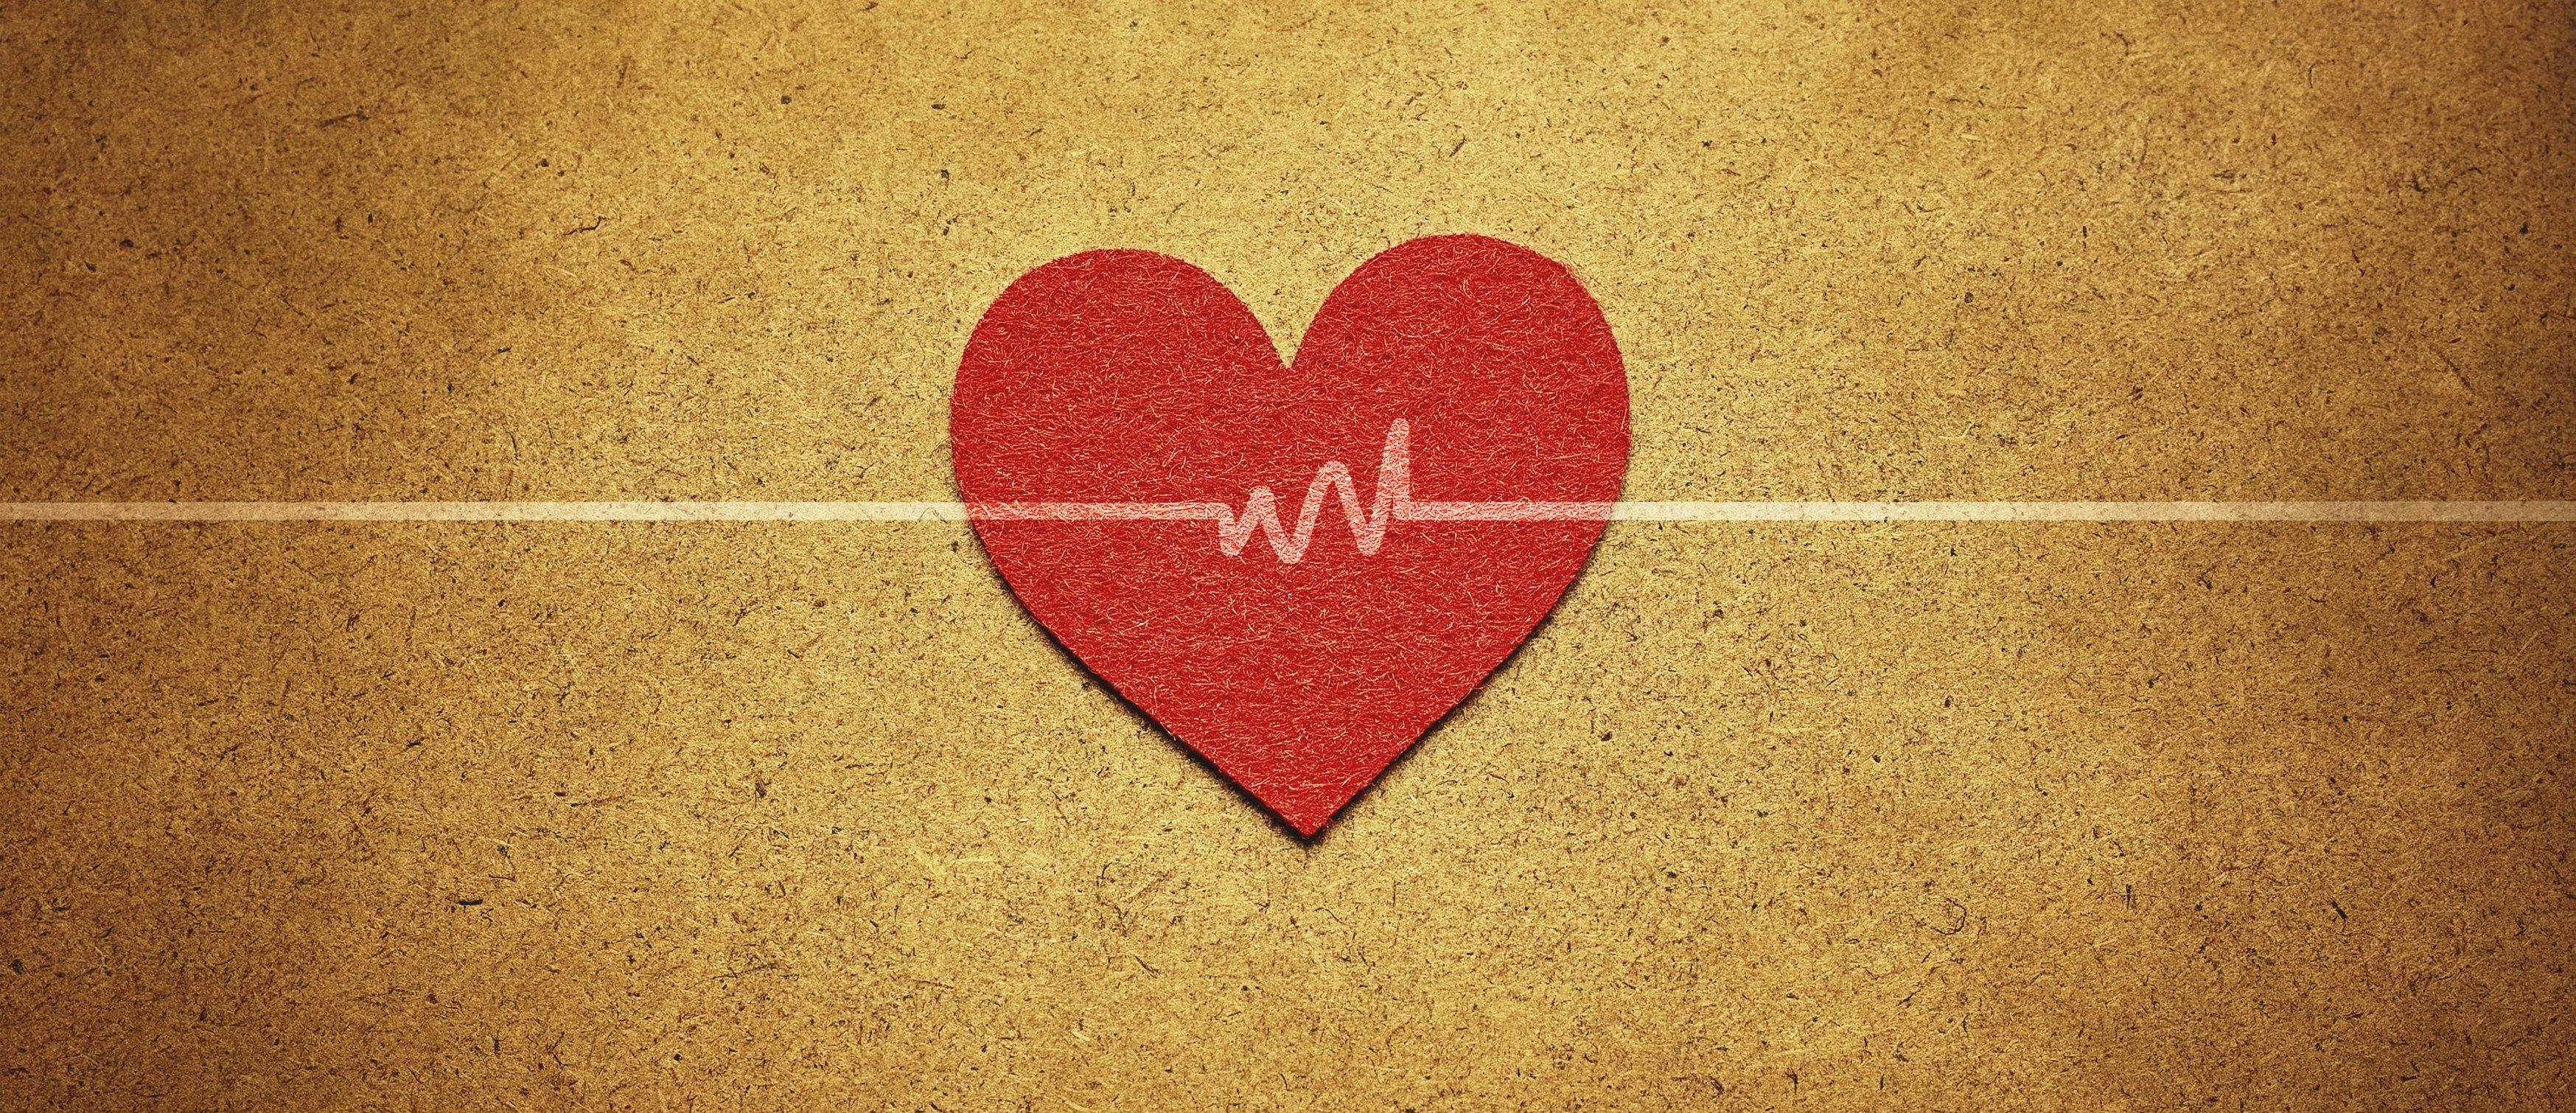 Younger Women Less Likely to Receive Preventive Care for Heart Disease